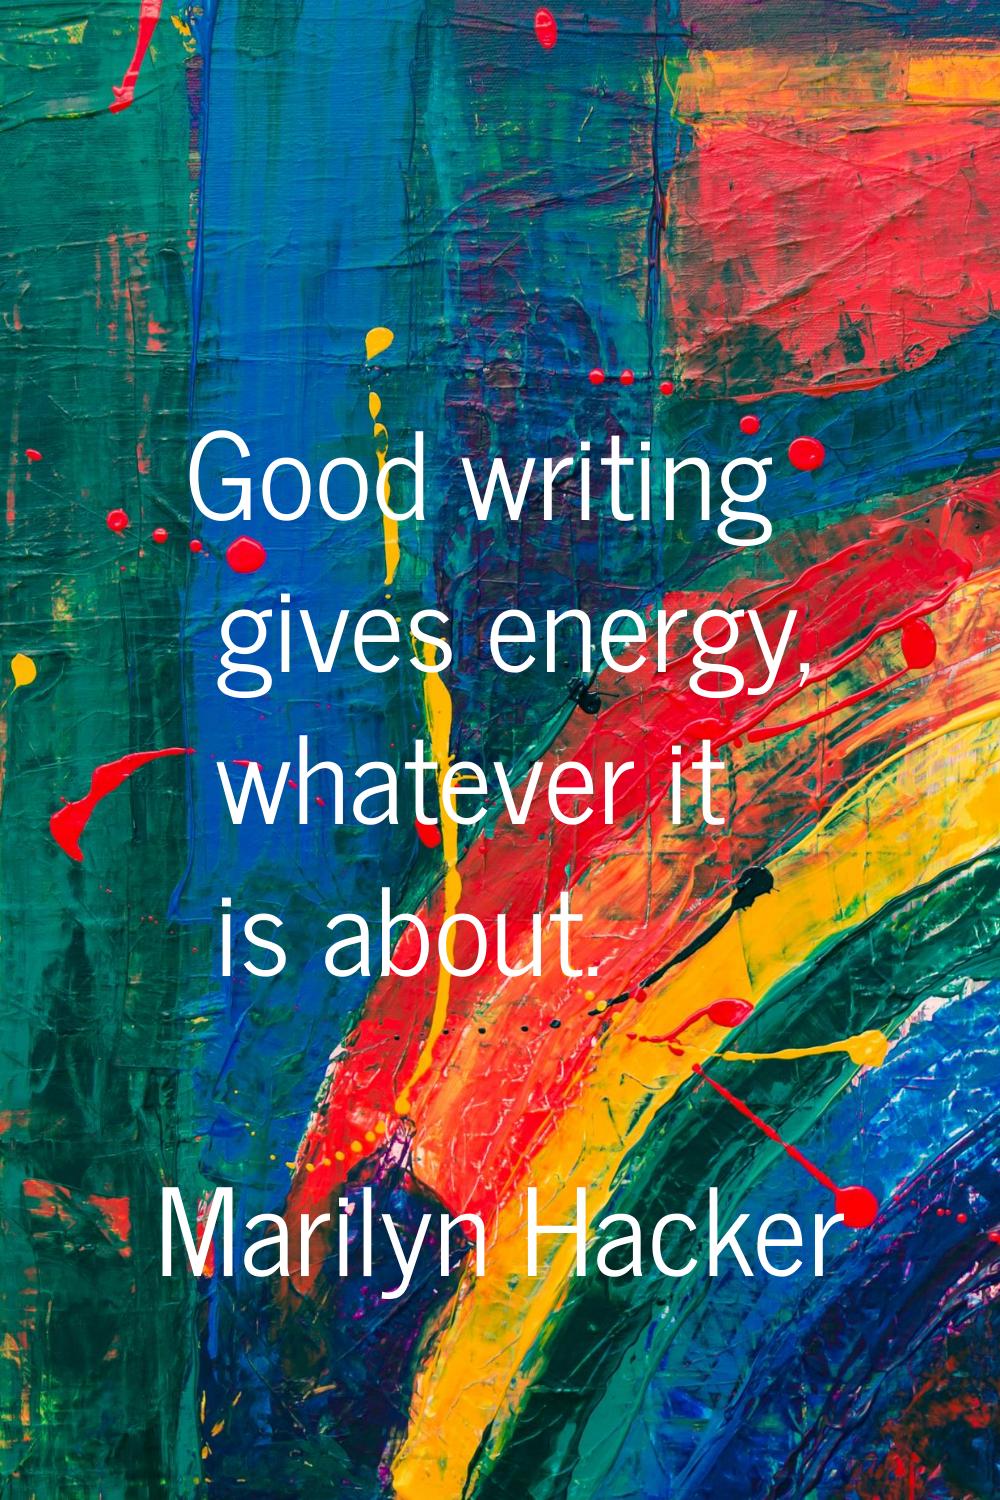 Good writing gives energy, whatever it is about.